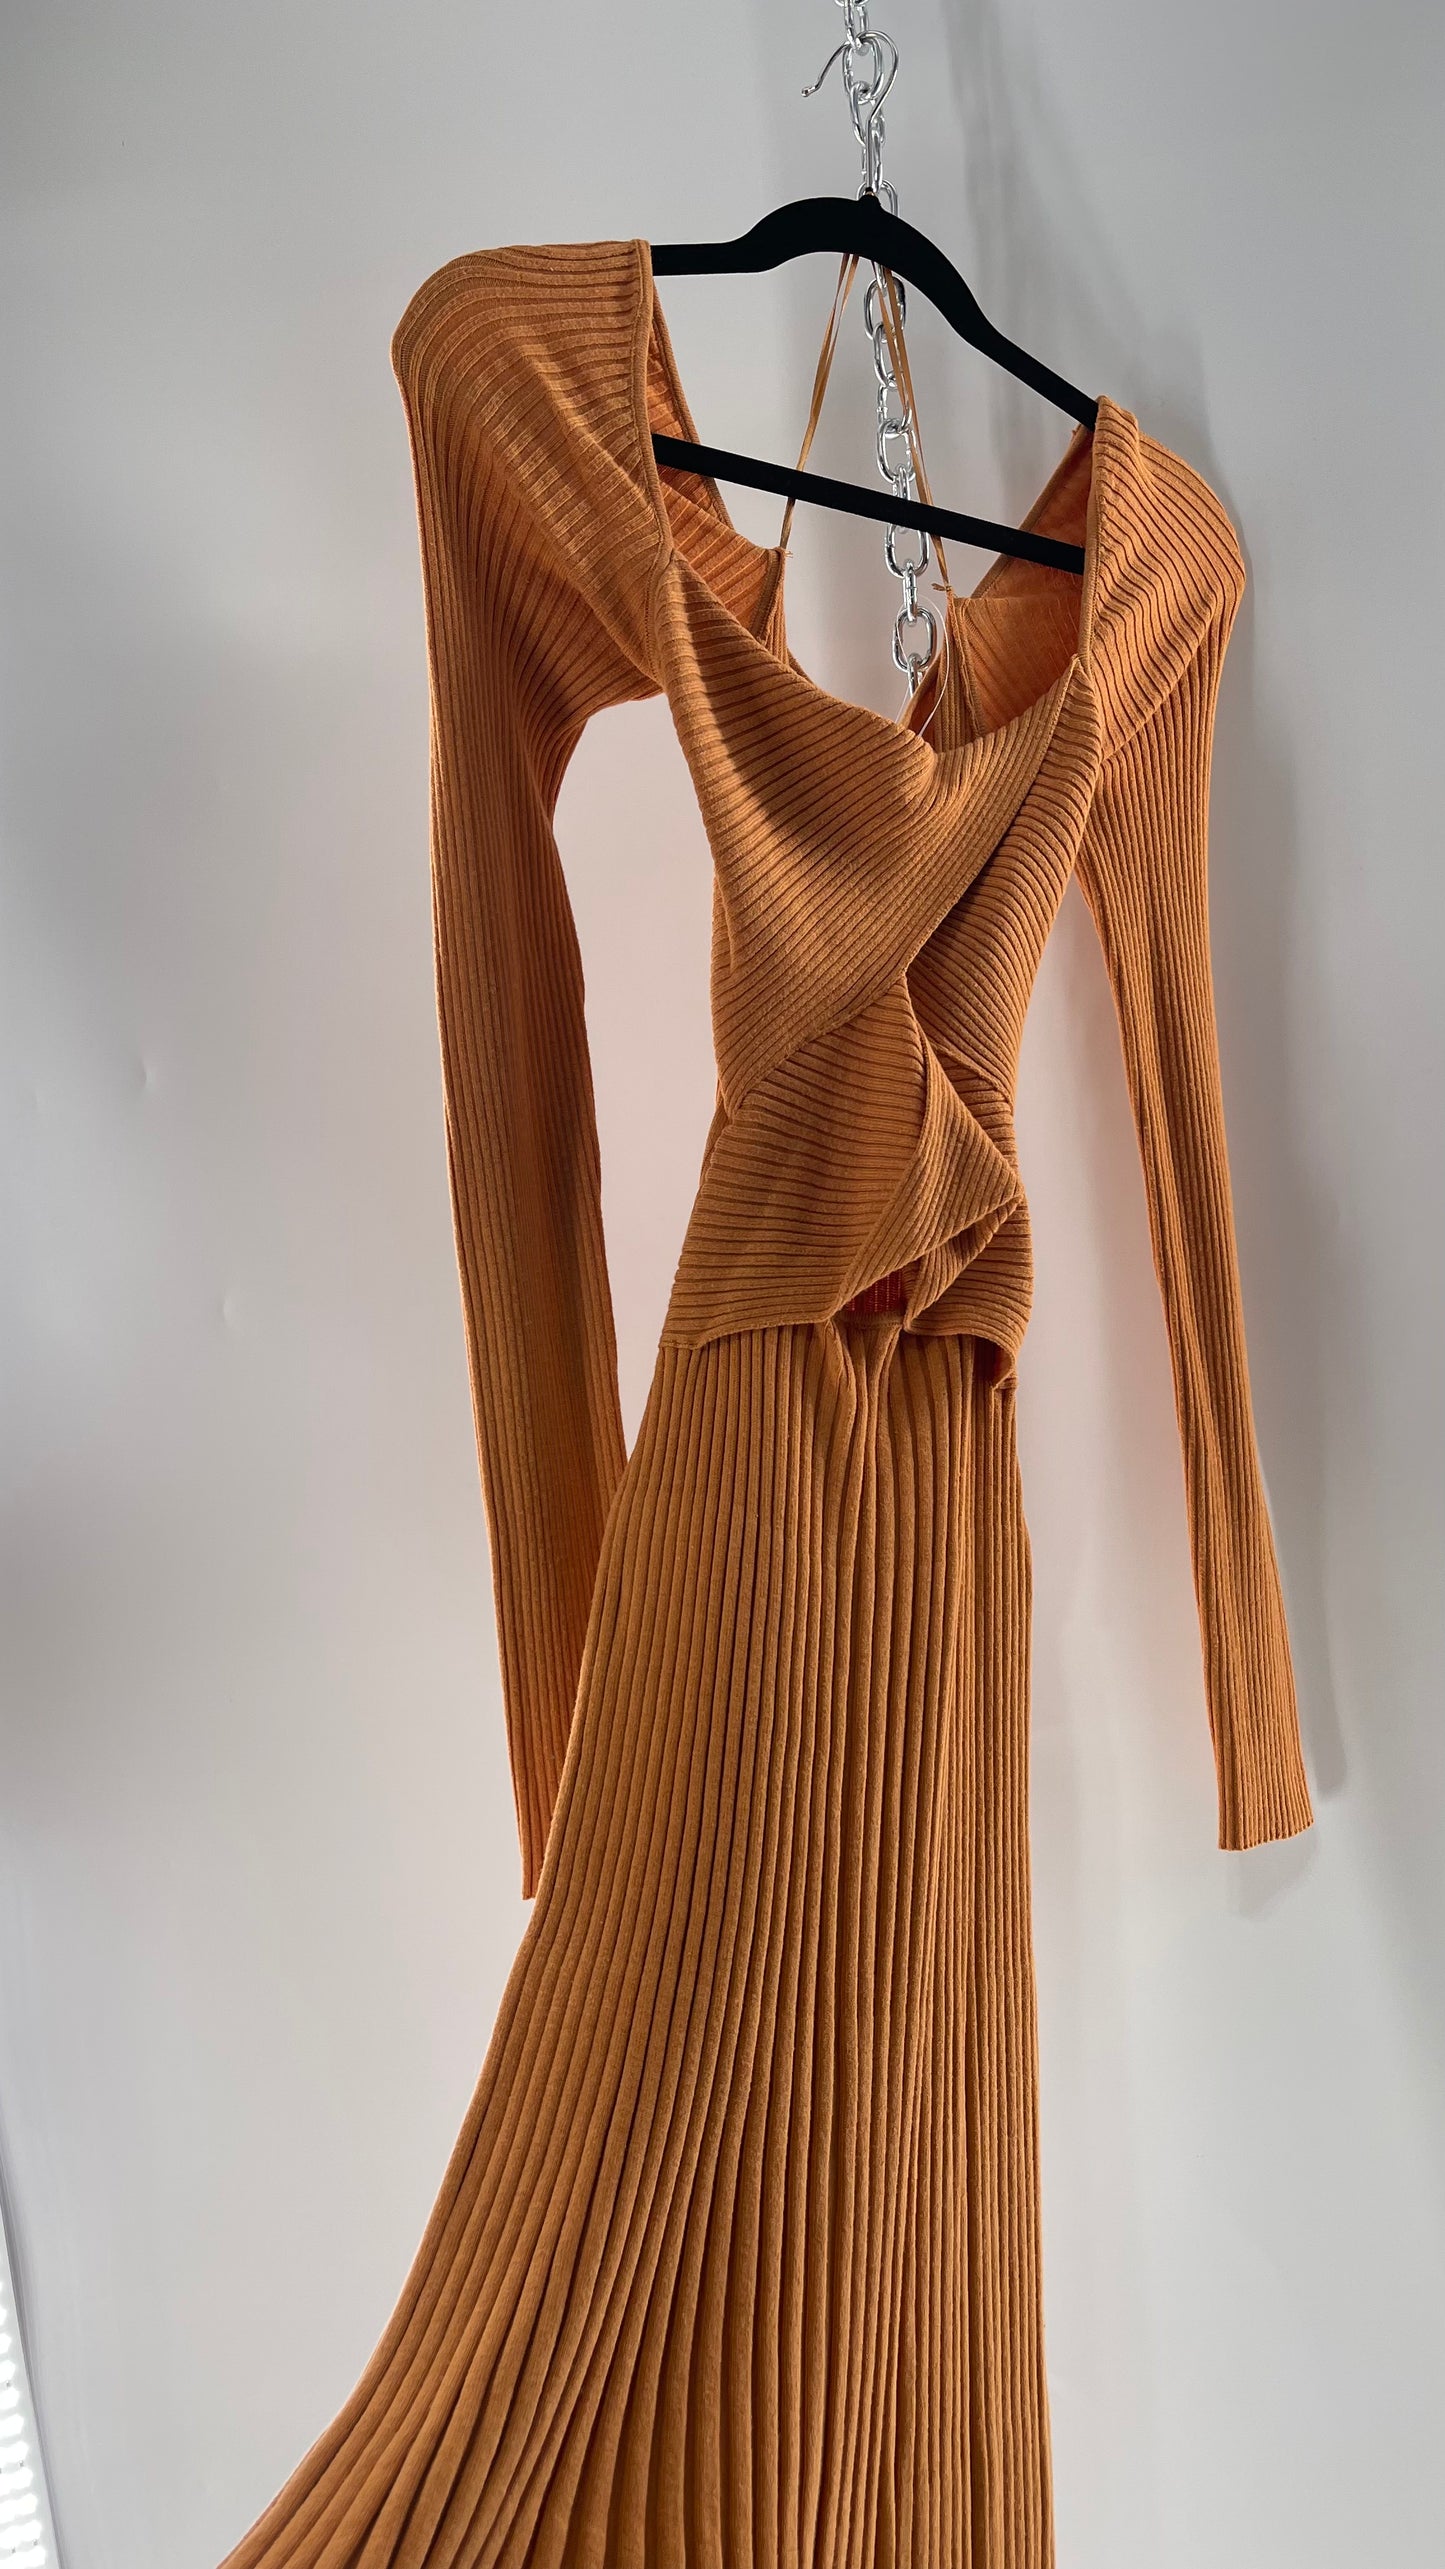 Free People Orange Knit Maxi Dress with Bandage Bust and Exposed Cut Out Midriff (Medium)